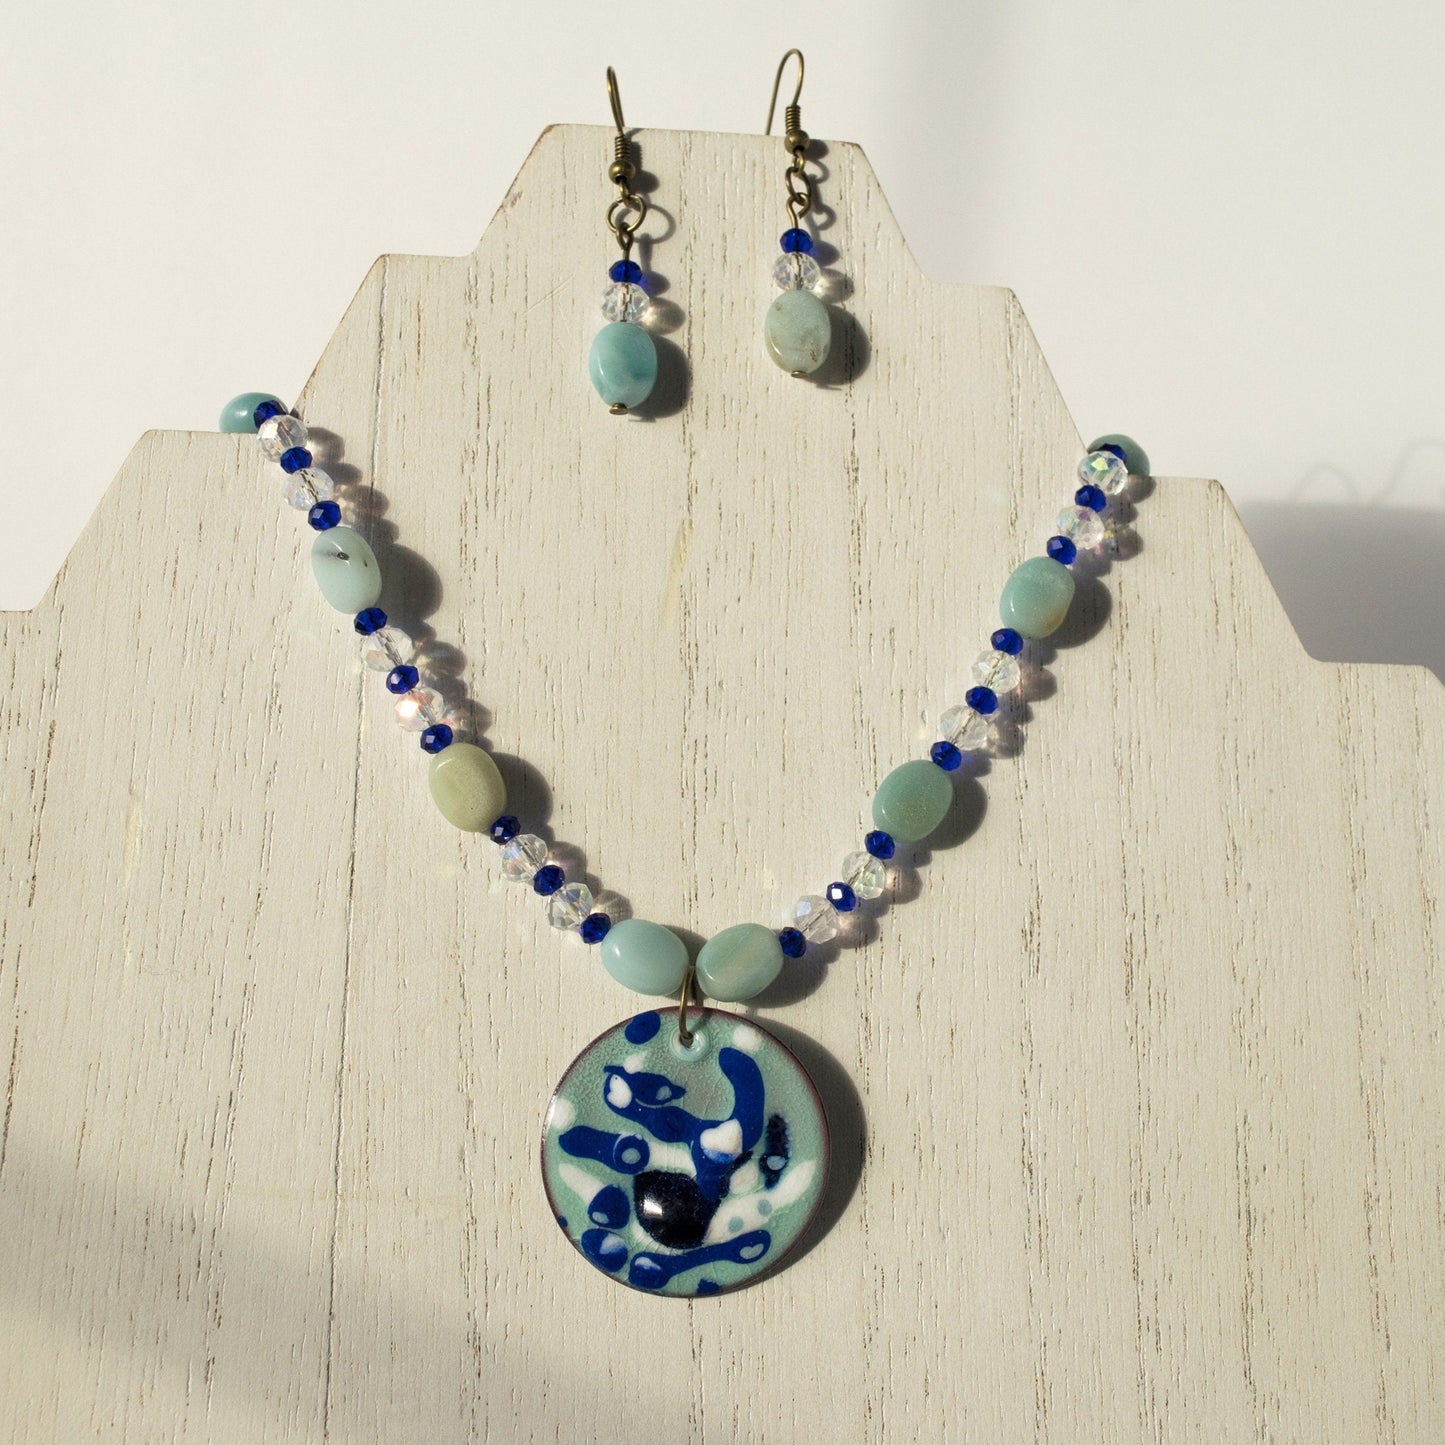 Amazonite and Clear Crystal Earrings and Necklace Set with Blue and White Enameled Pendant